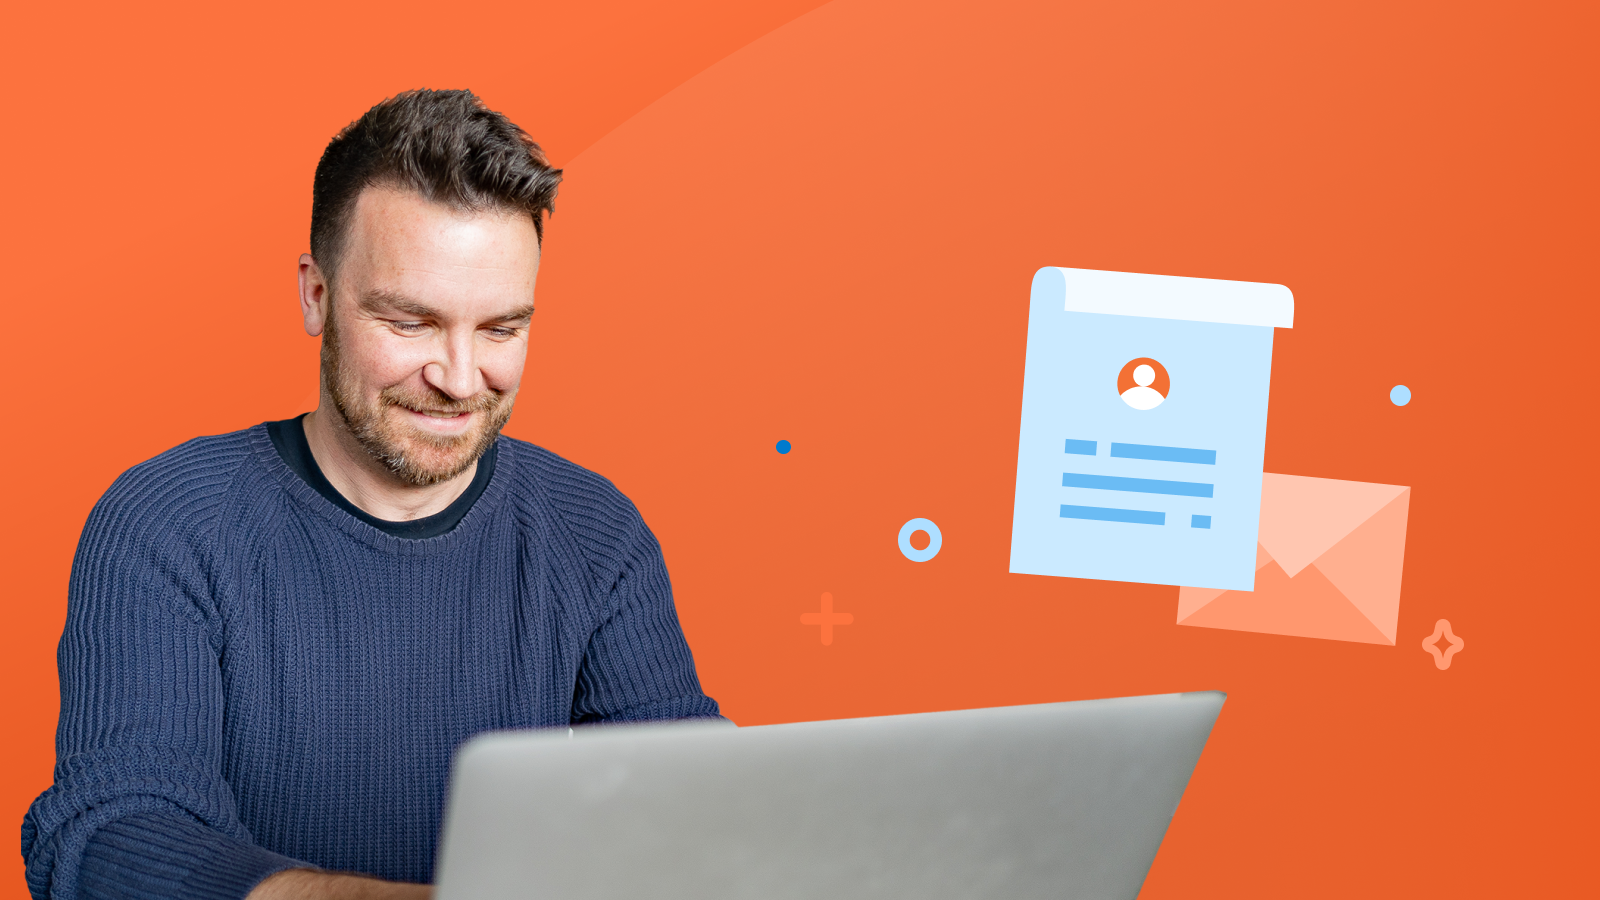 Man working on a laptop with an orange background and a CV illustration